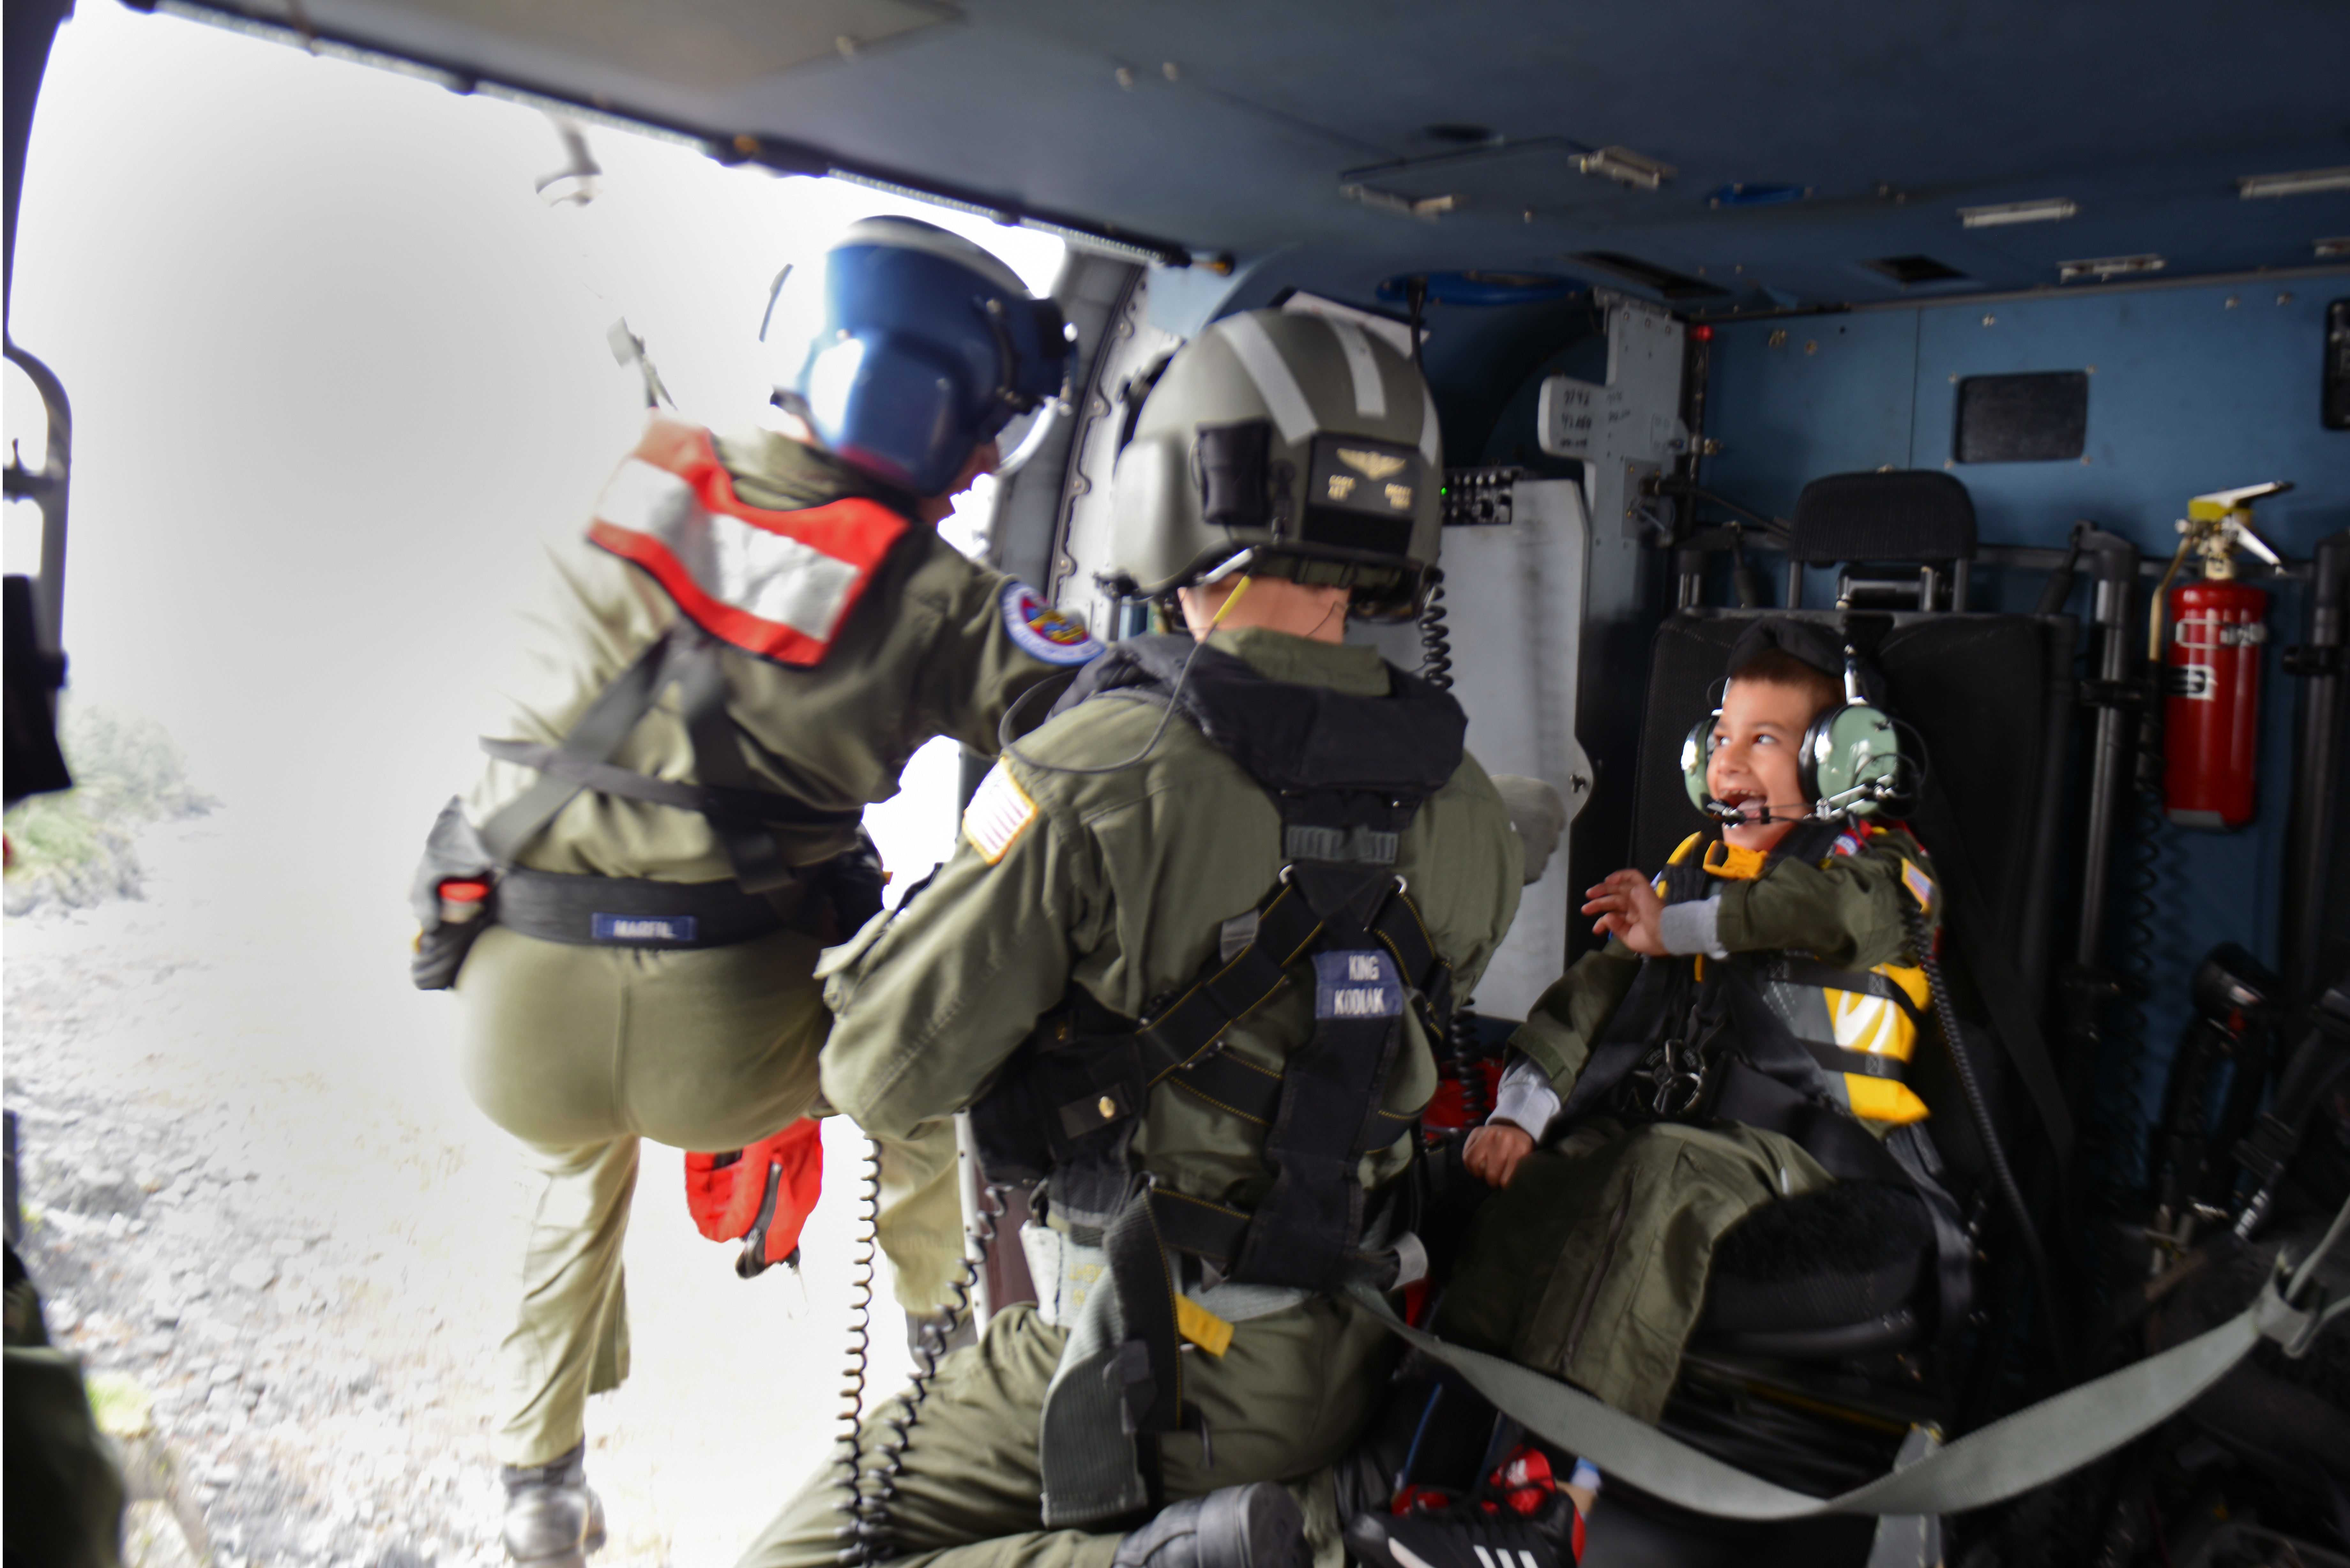 Andrew Bishop, 8, right, was named an honorary petty officer third-class by the U.S. Coast Guard Air Station Kodiak as part of his Make-A-Wish to be a rescue swimmer. (Photo by Meredith Manning/USCG)